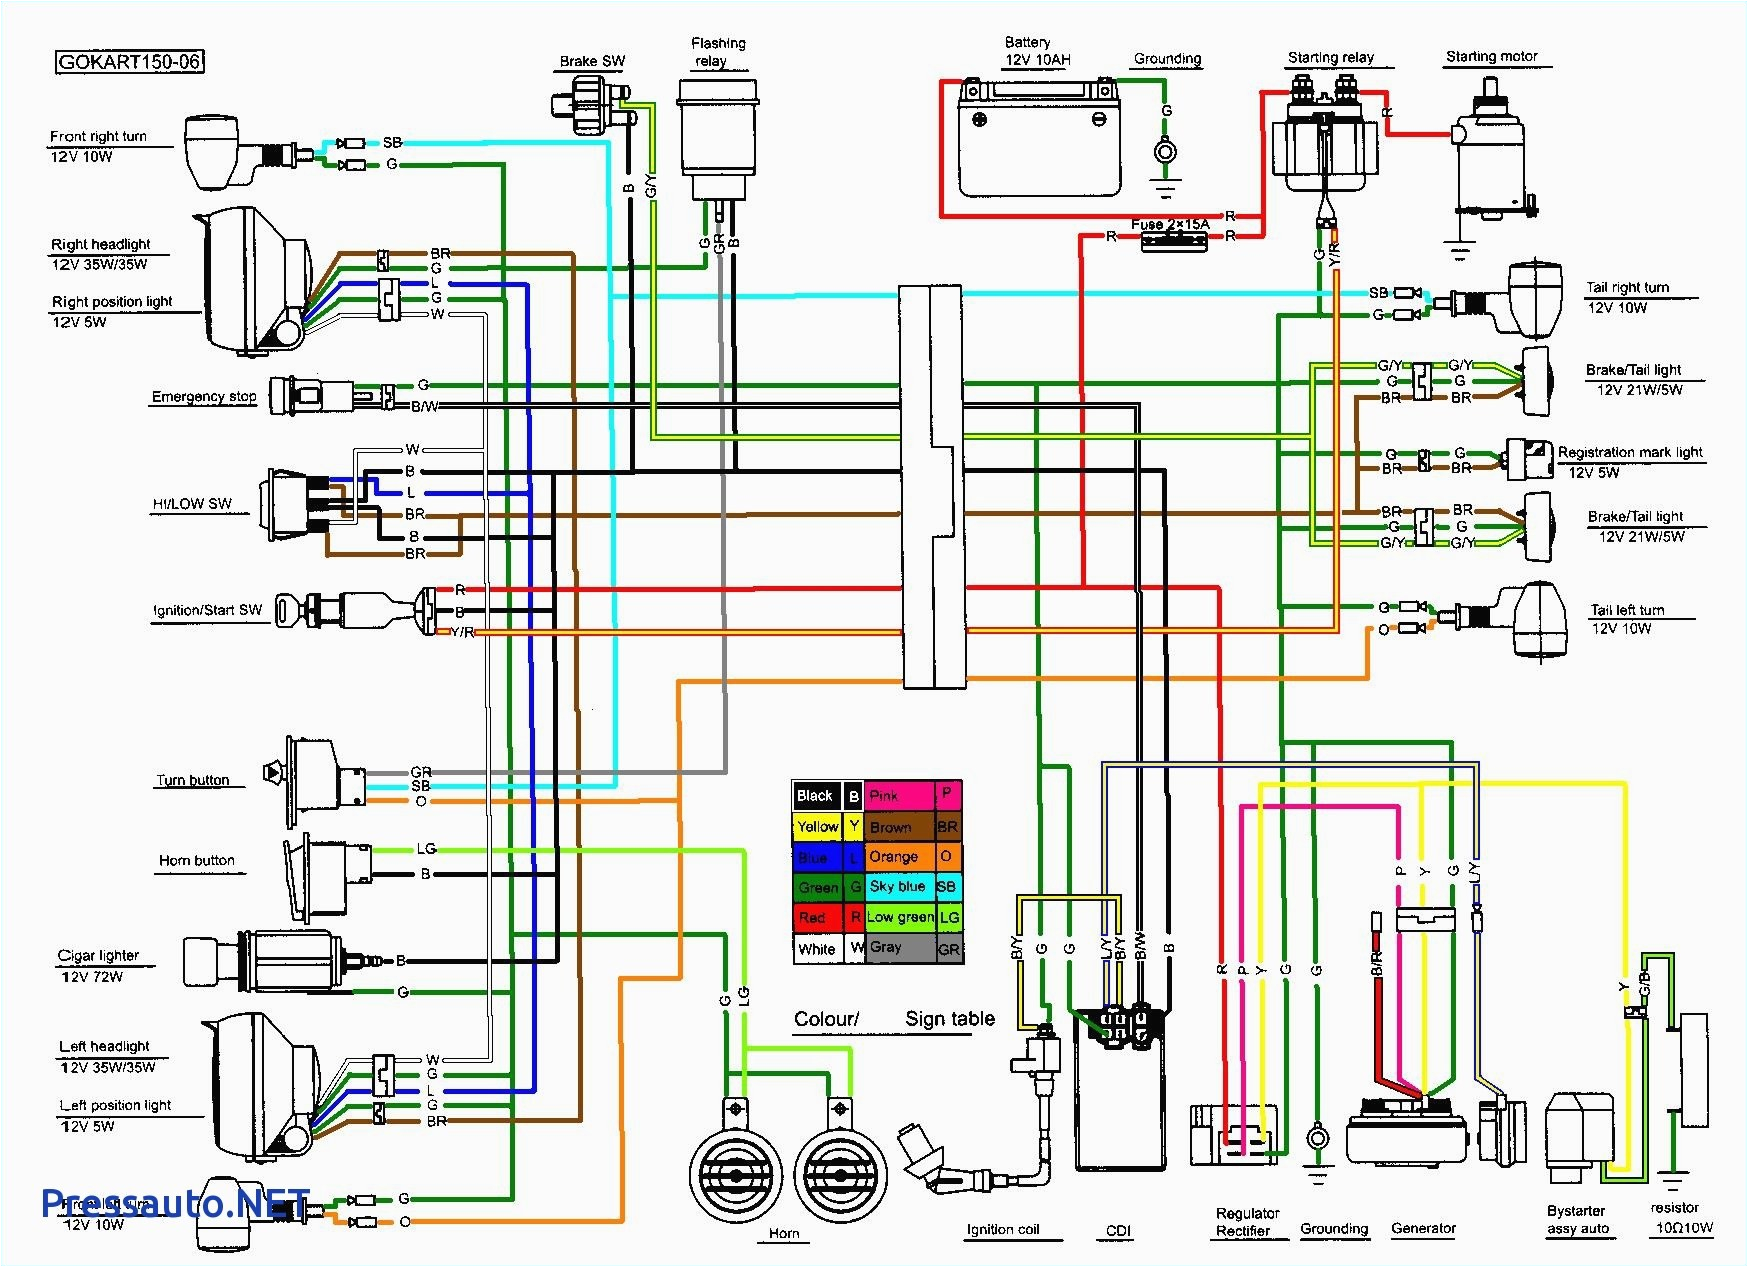 chinese scooters wiring diagram wiring diagram long chinese scooter cdi wiring diagram chinese scooters wiring diagram